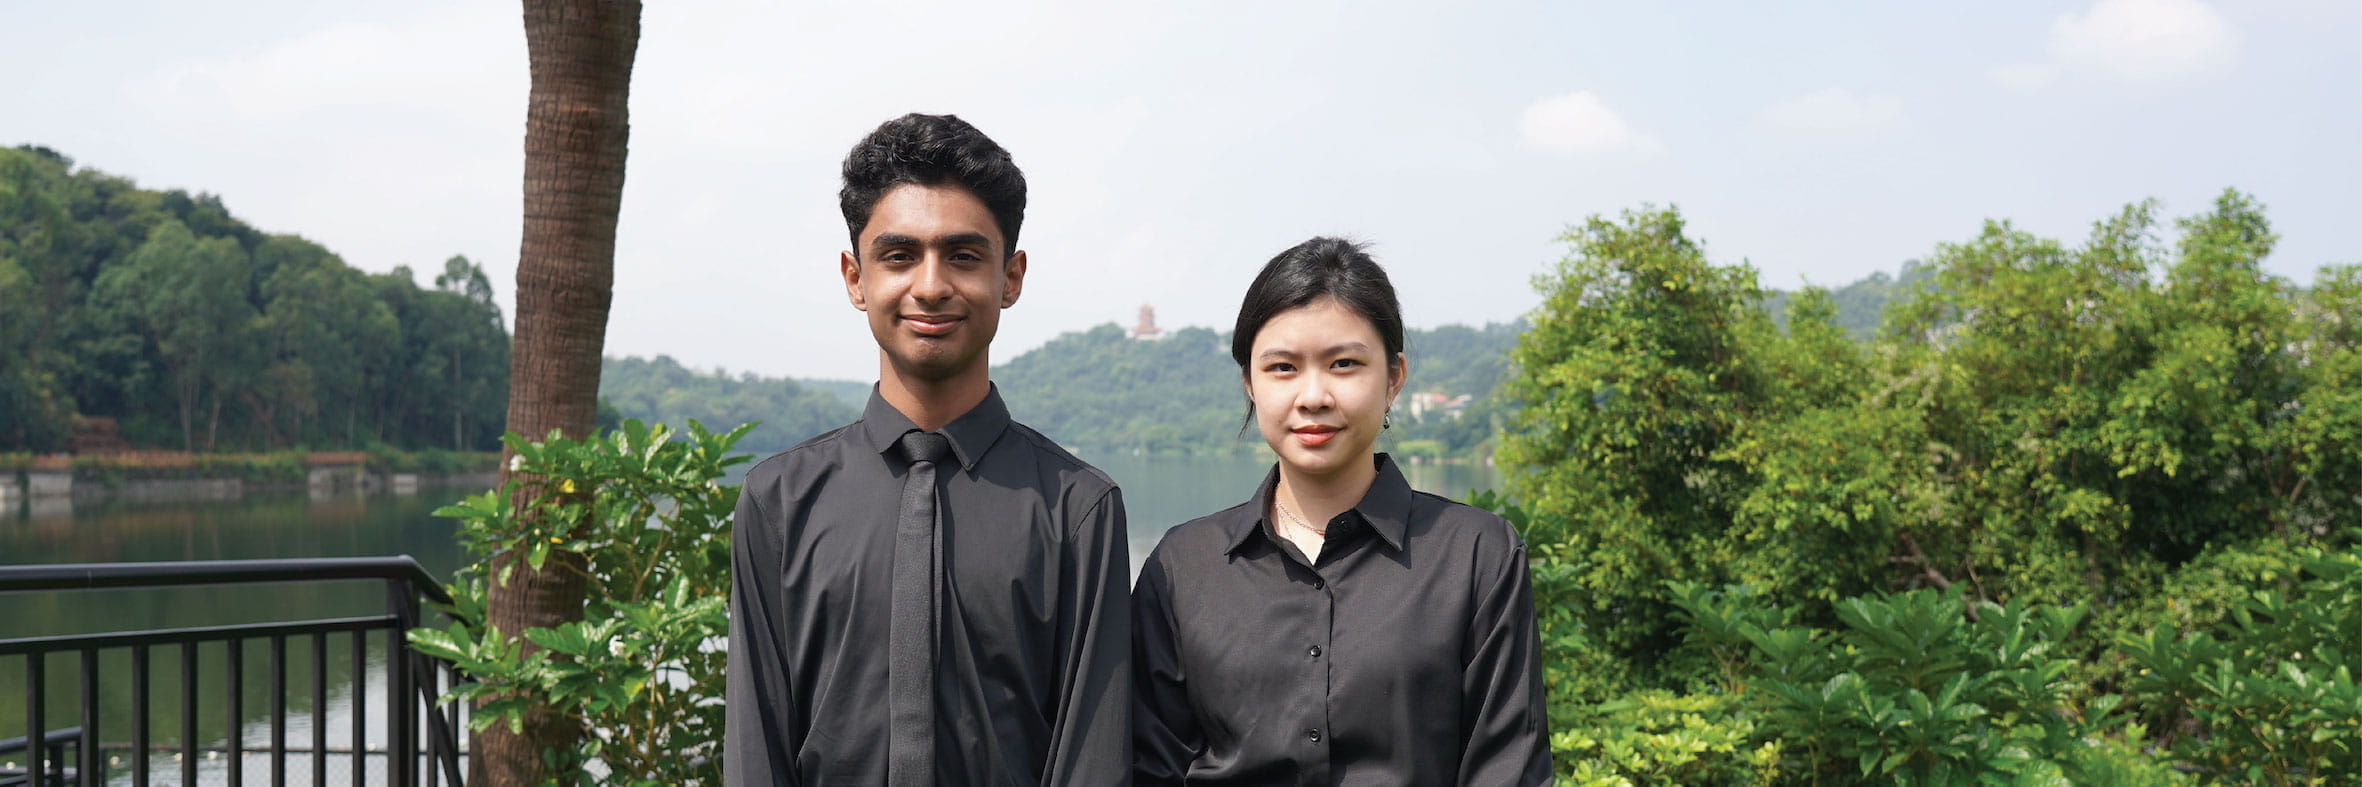 A Level Programme in China | The British School of Guangzhou - Content Page Header